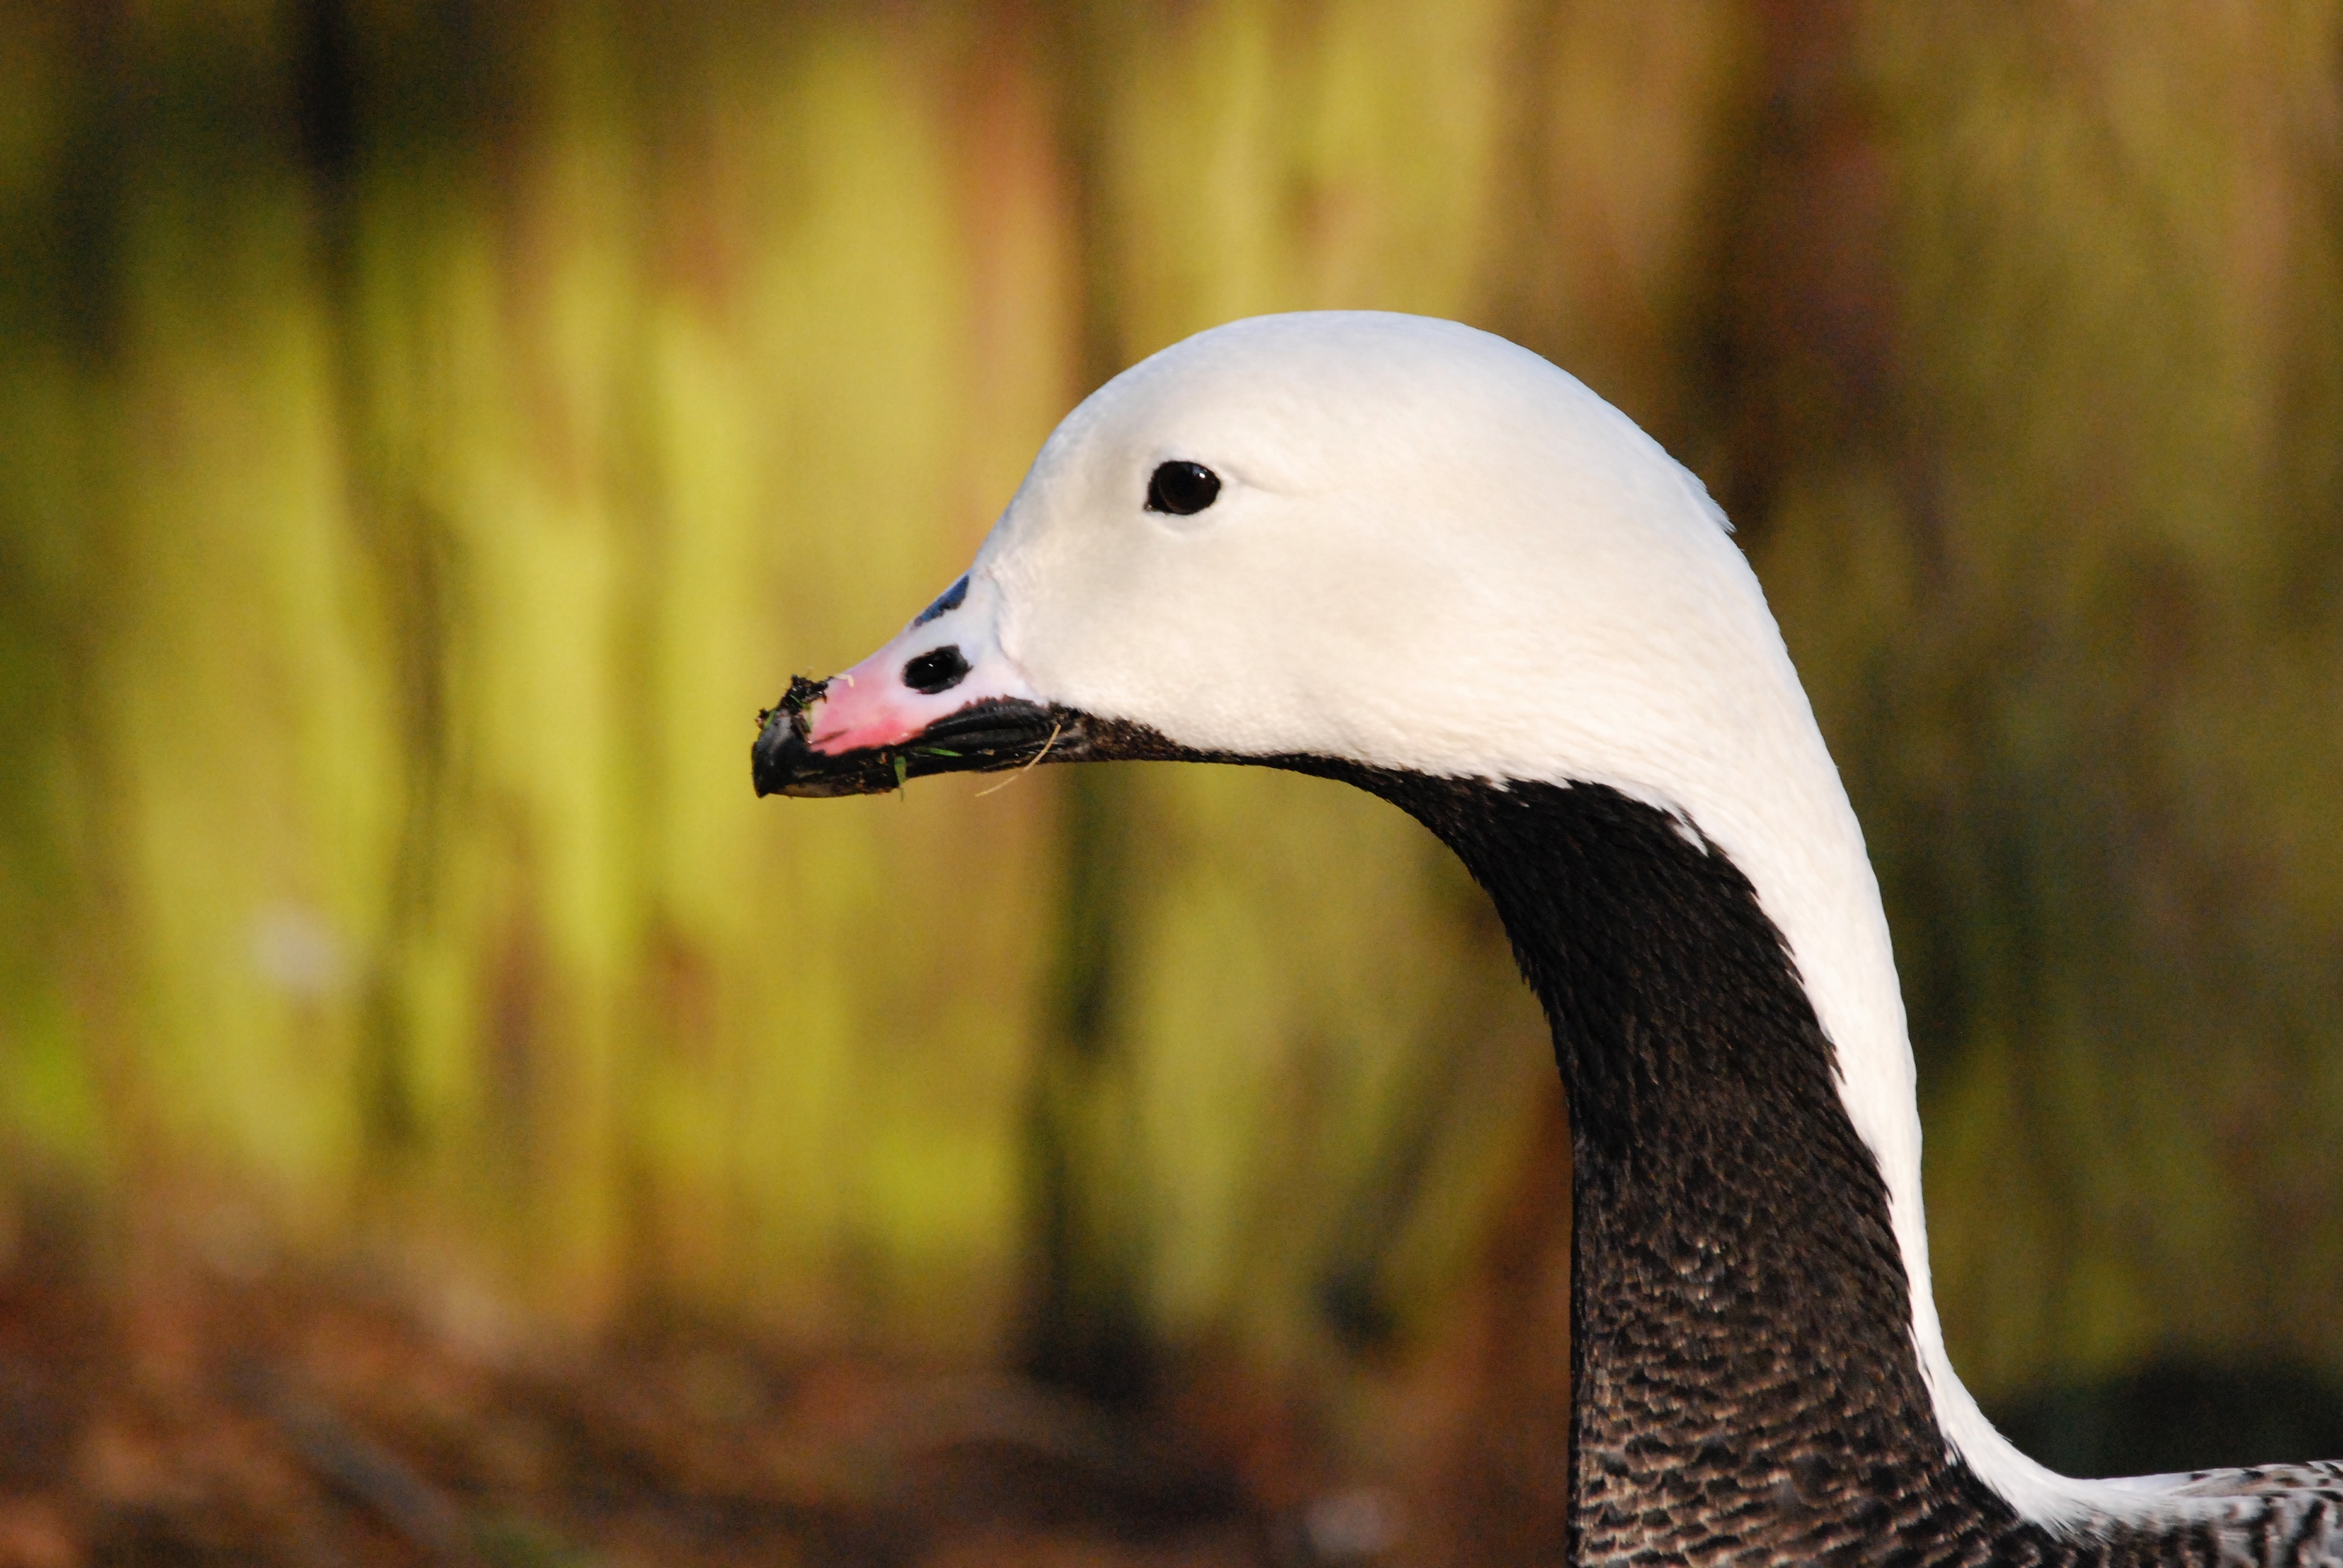 white and black domestic duck focus photography